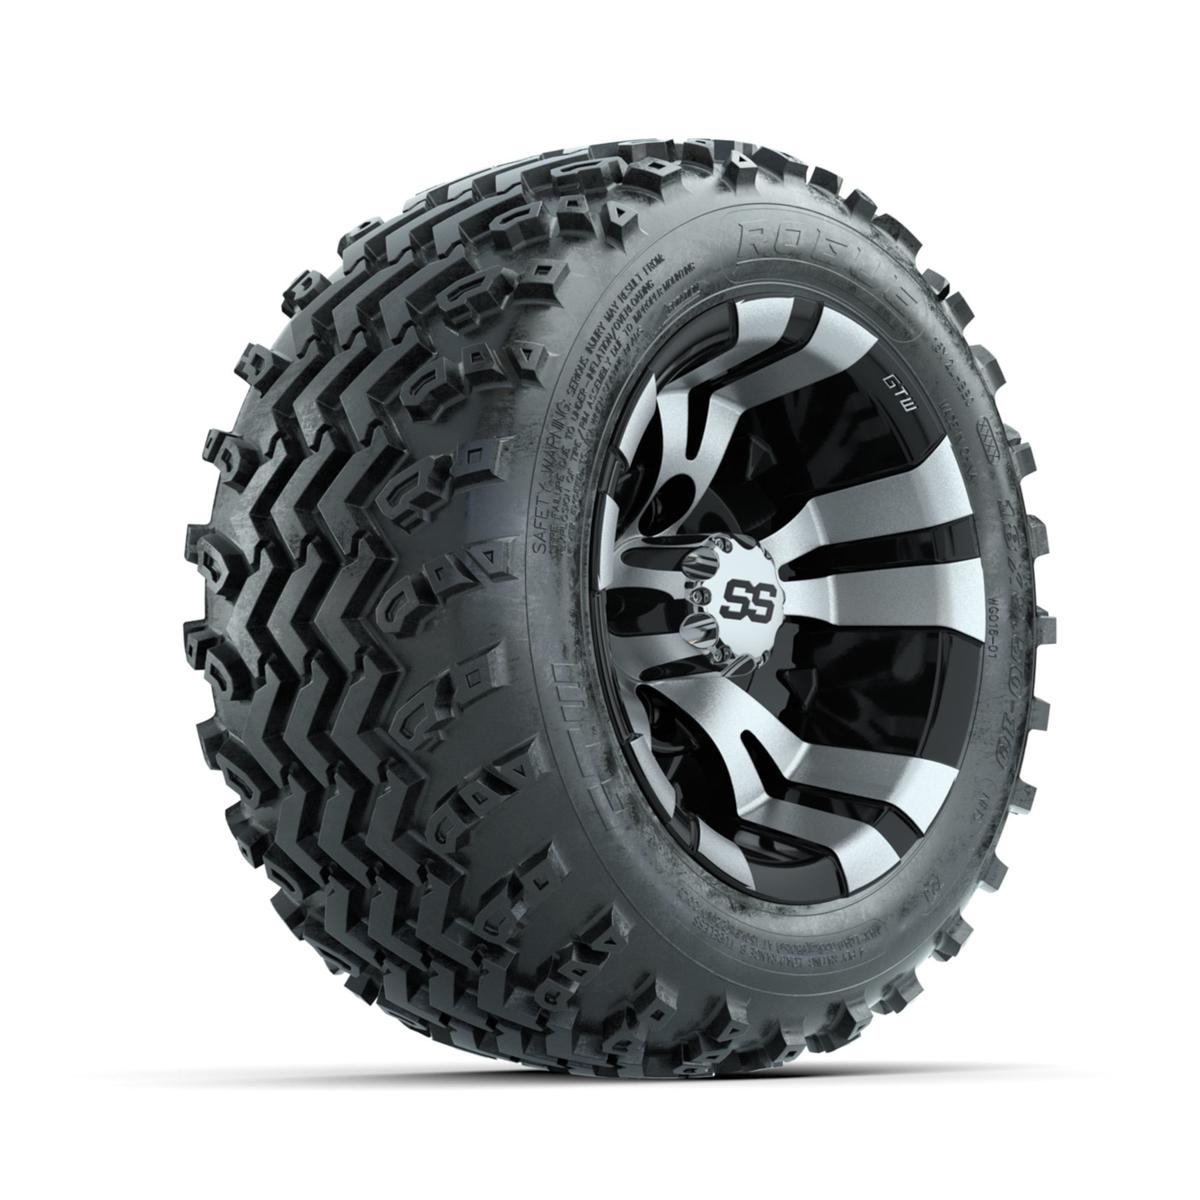 GTW Vampire Machined/Black 10 in Wheels with 18x9.50-10 Rogue All Terrain Tires – Full Set